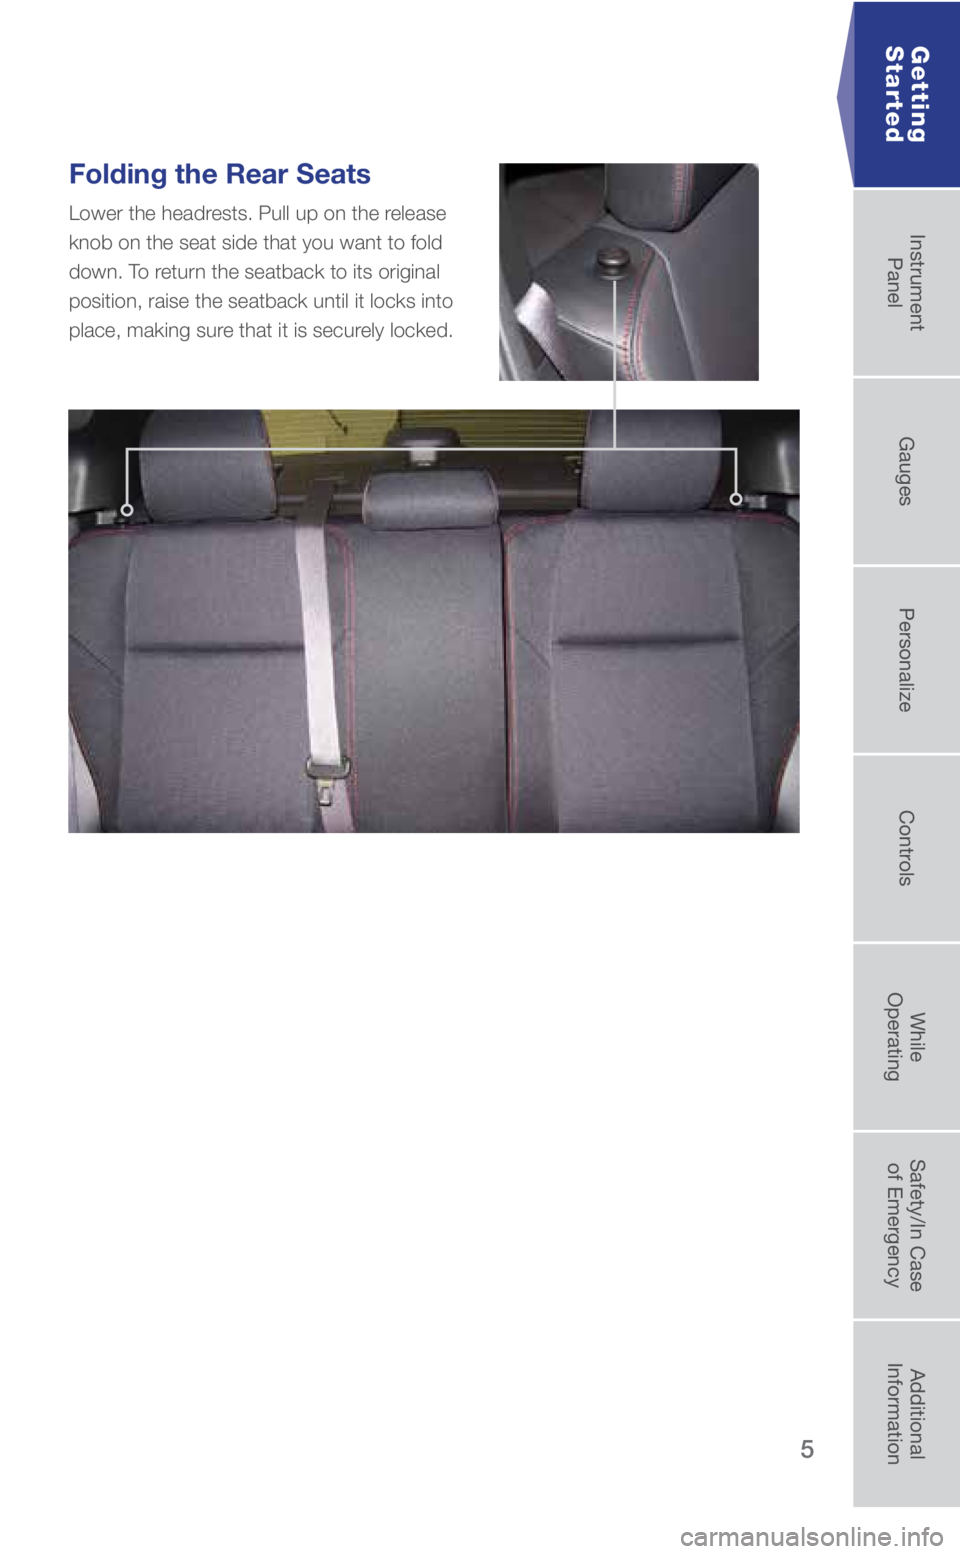 SUBARU WRX 2018  Quick Guide 5
Folding the Rear Seats
Lower the headrests. Pull up on the release 
knob on the seat side that you want to fold 
down. To return the seatback to its original 
position, raise the seatback until it l